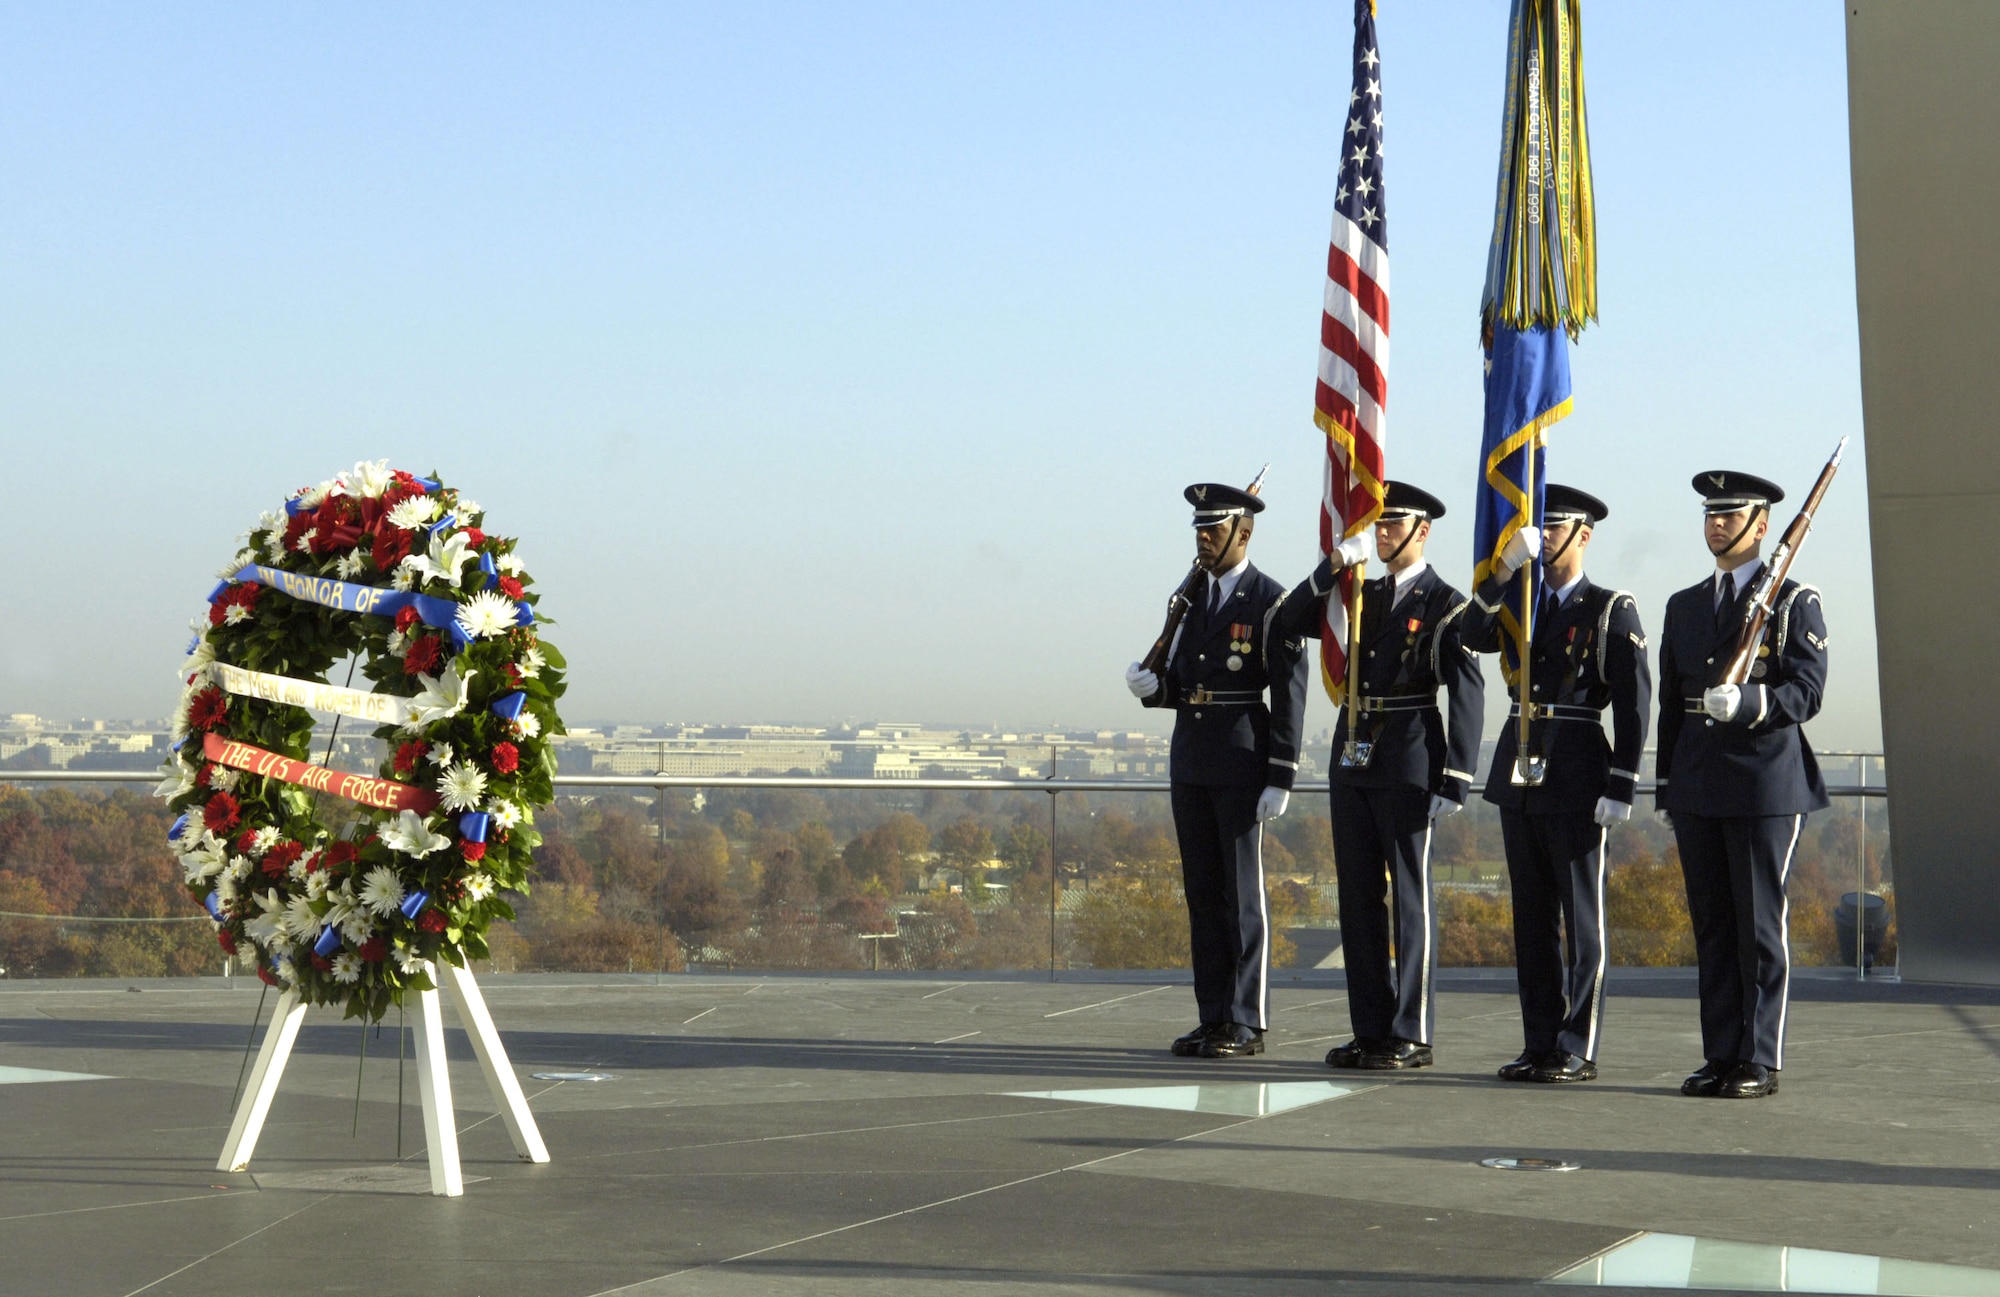 Color Guard members from Bolling Air Force Base stand at attention at the conclusion of a wreath presentation by Doolittle's Raiders at the Air Force Memorial on Nov. 10, in Arlington, Va. The wreath was placed at the base of the Air Force Memorial in rememberance of fallen Air Force members from the past and present. (U.S. Air Force photo/Tech. Sgt. Cohen Young)